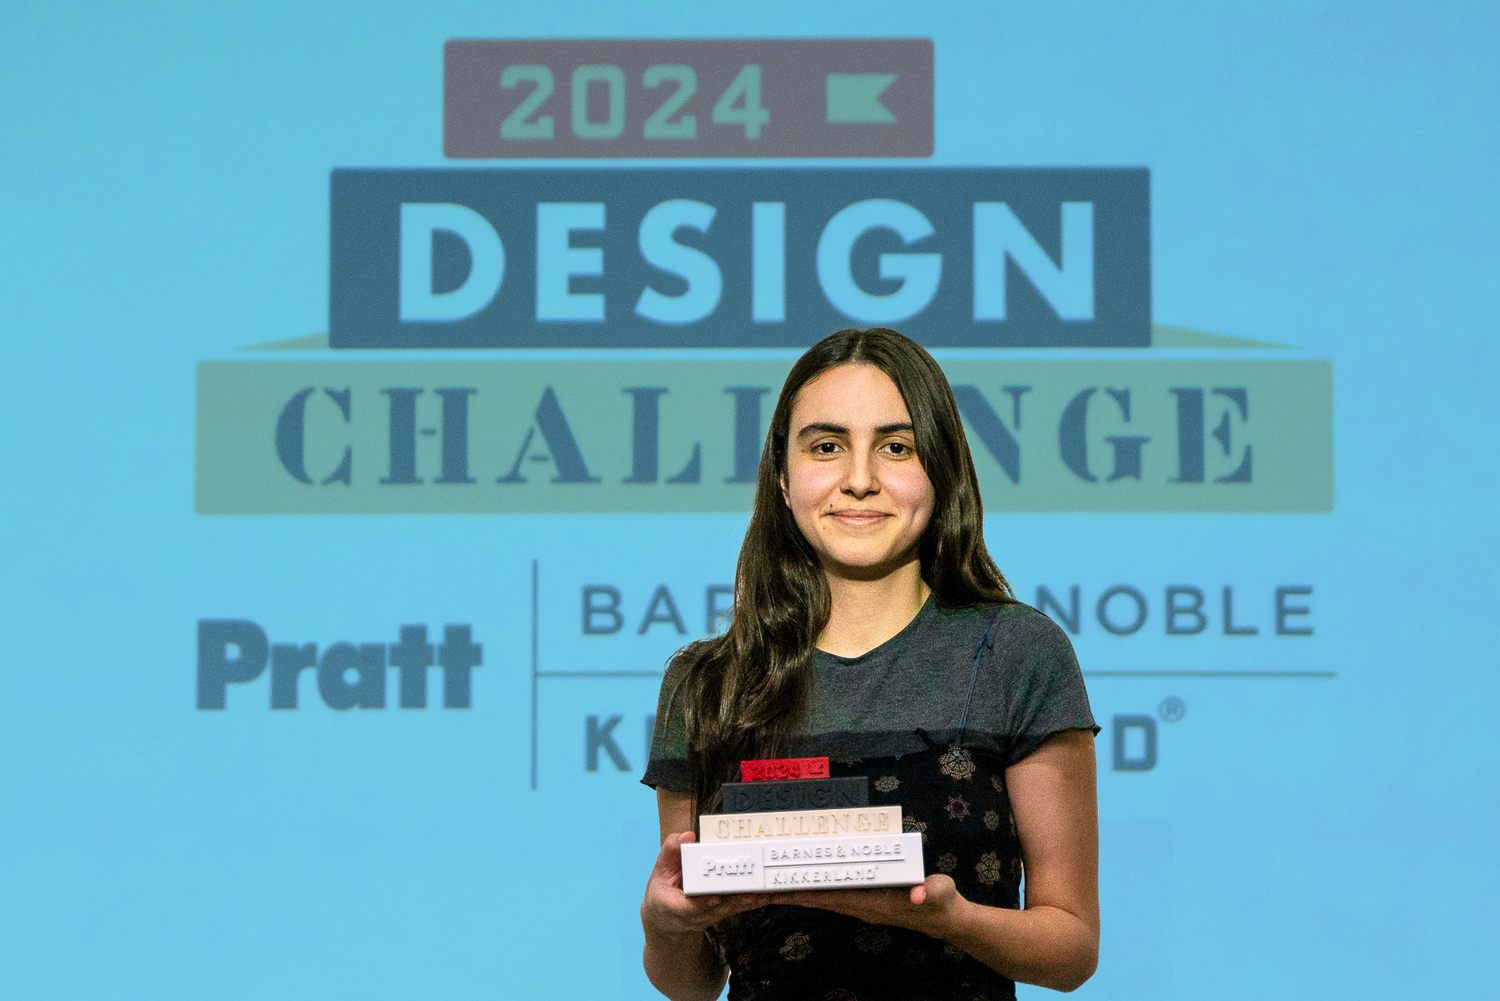 Announcing the winners of the 2024 Design Challenge